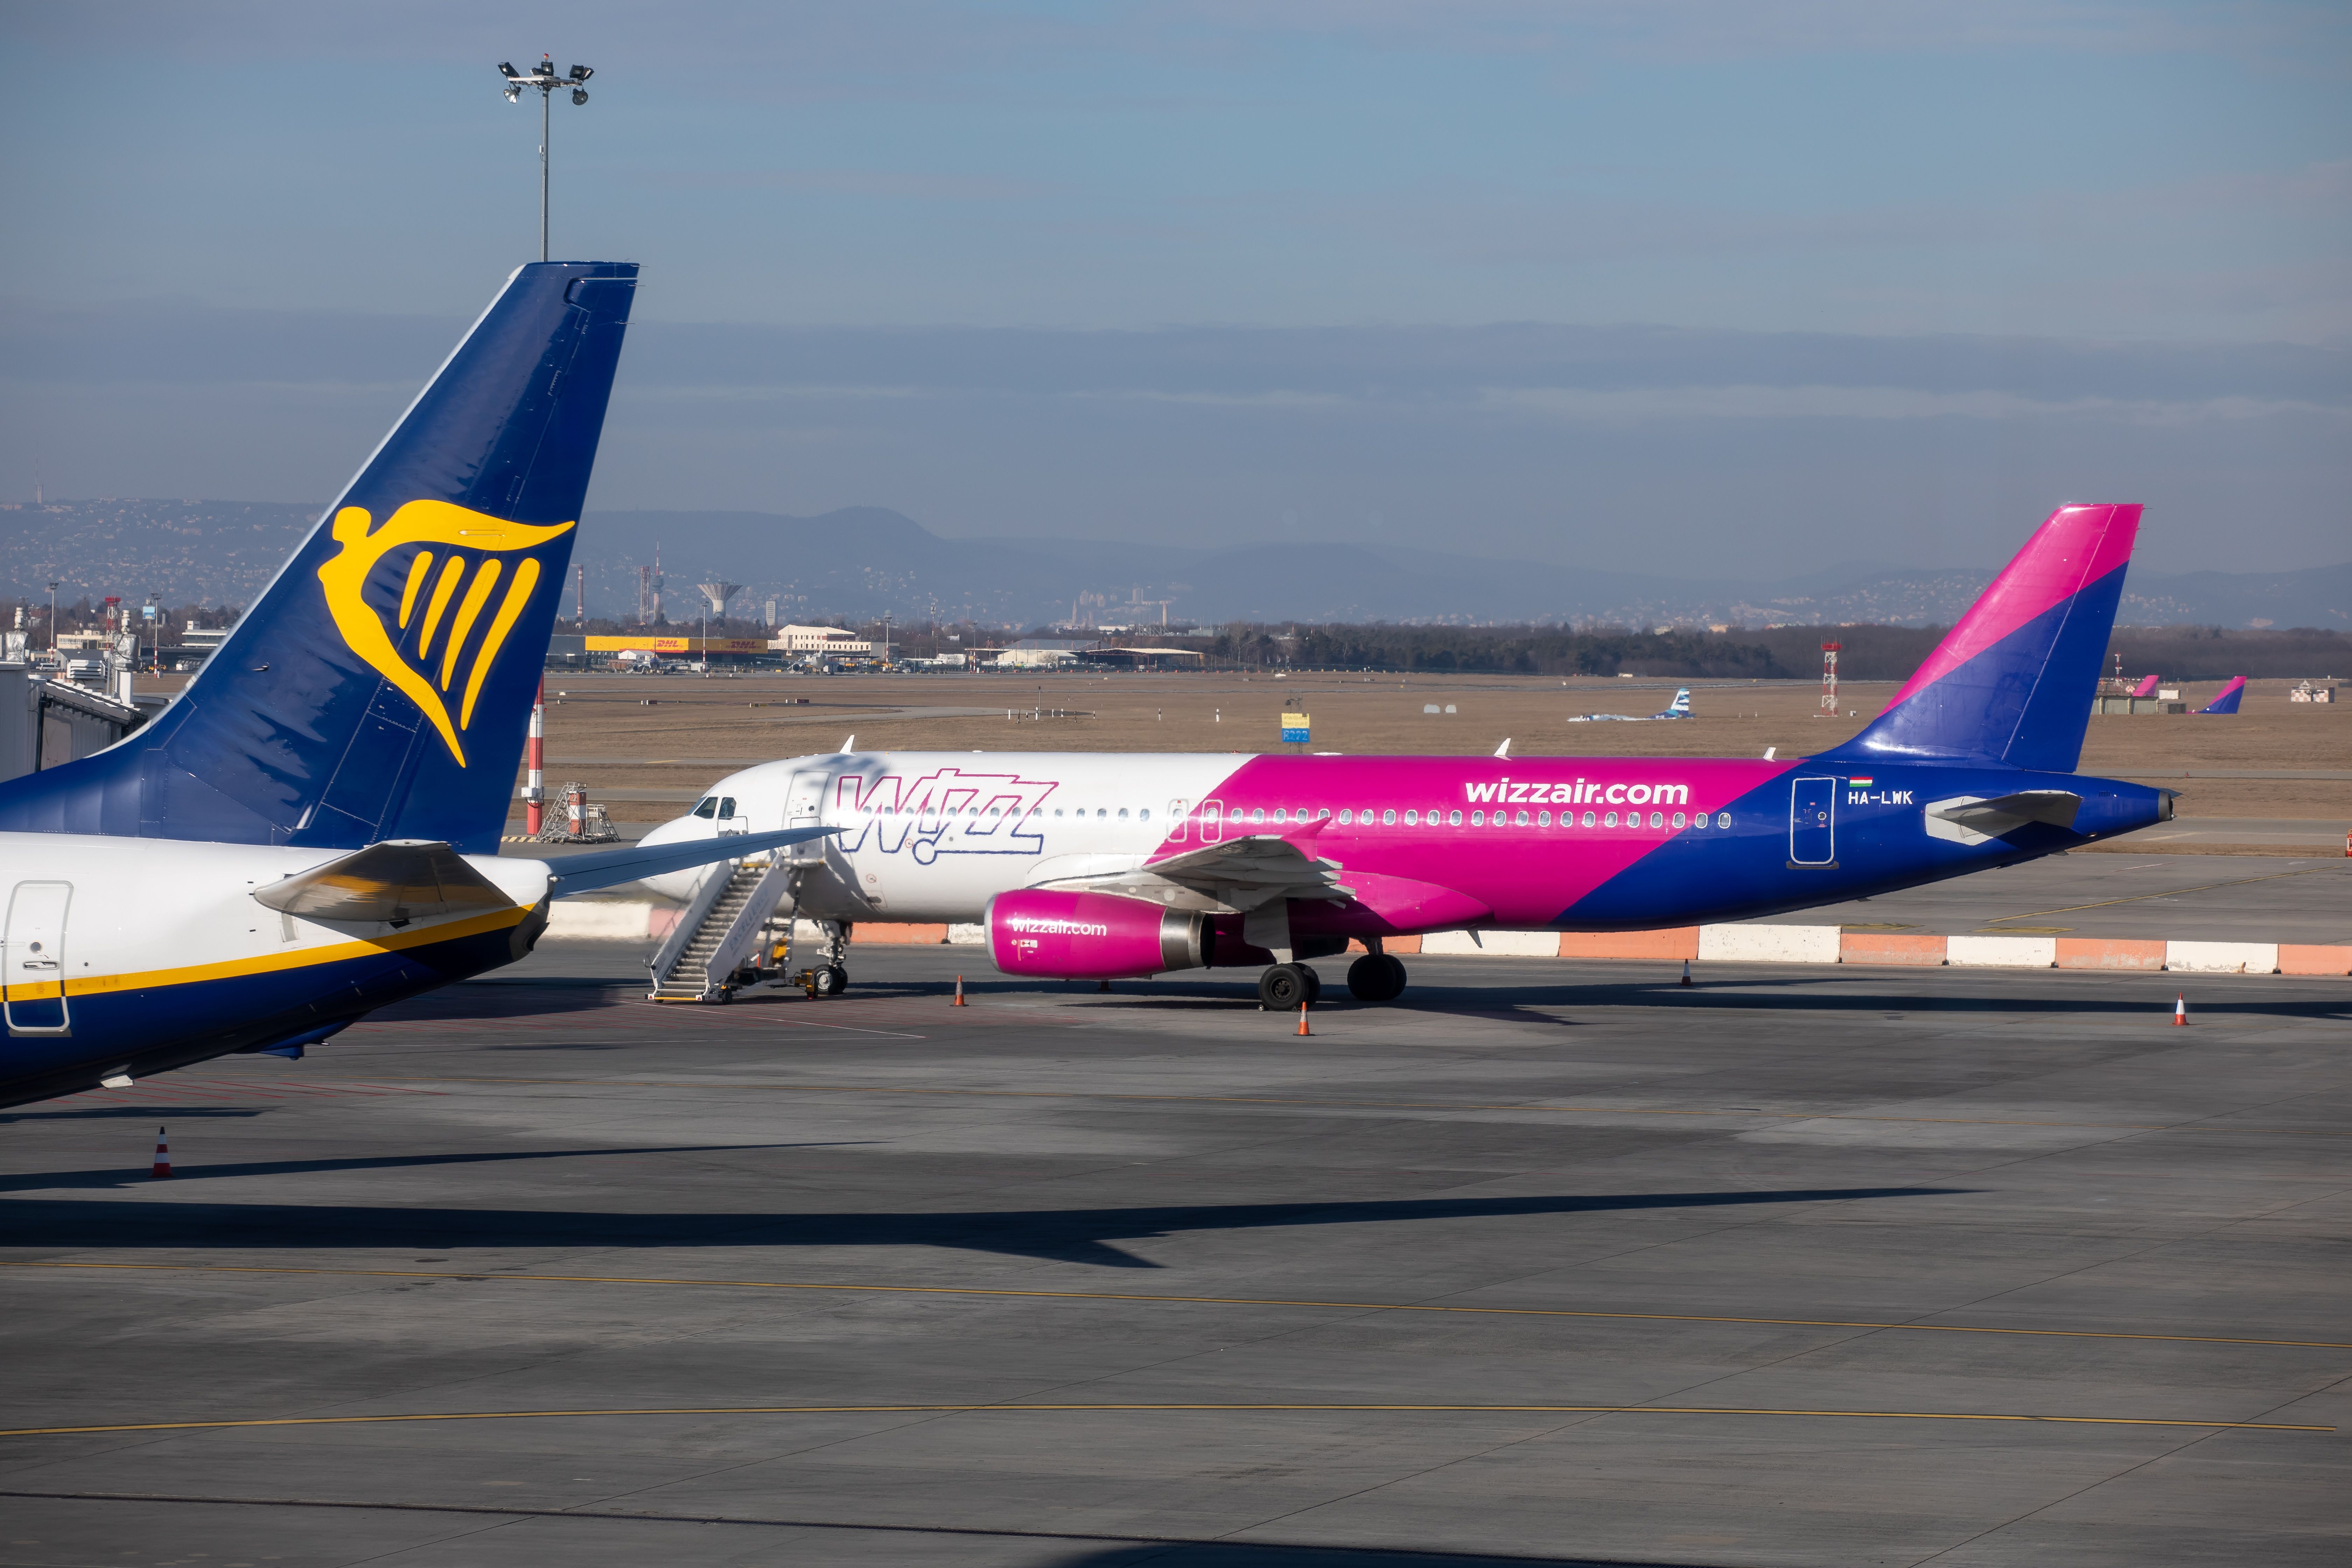 S Wizz Air Airbus A320 Parked on an airport apron With a Ryanair aircraft Tail seen In the Foreground.